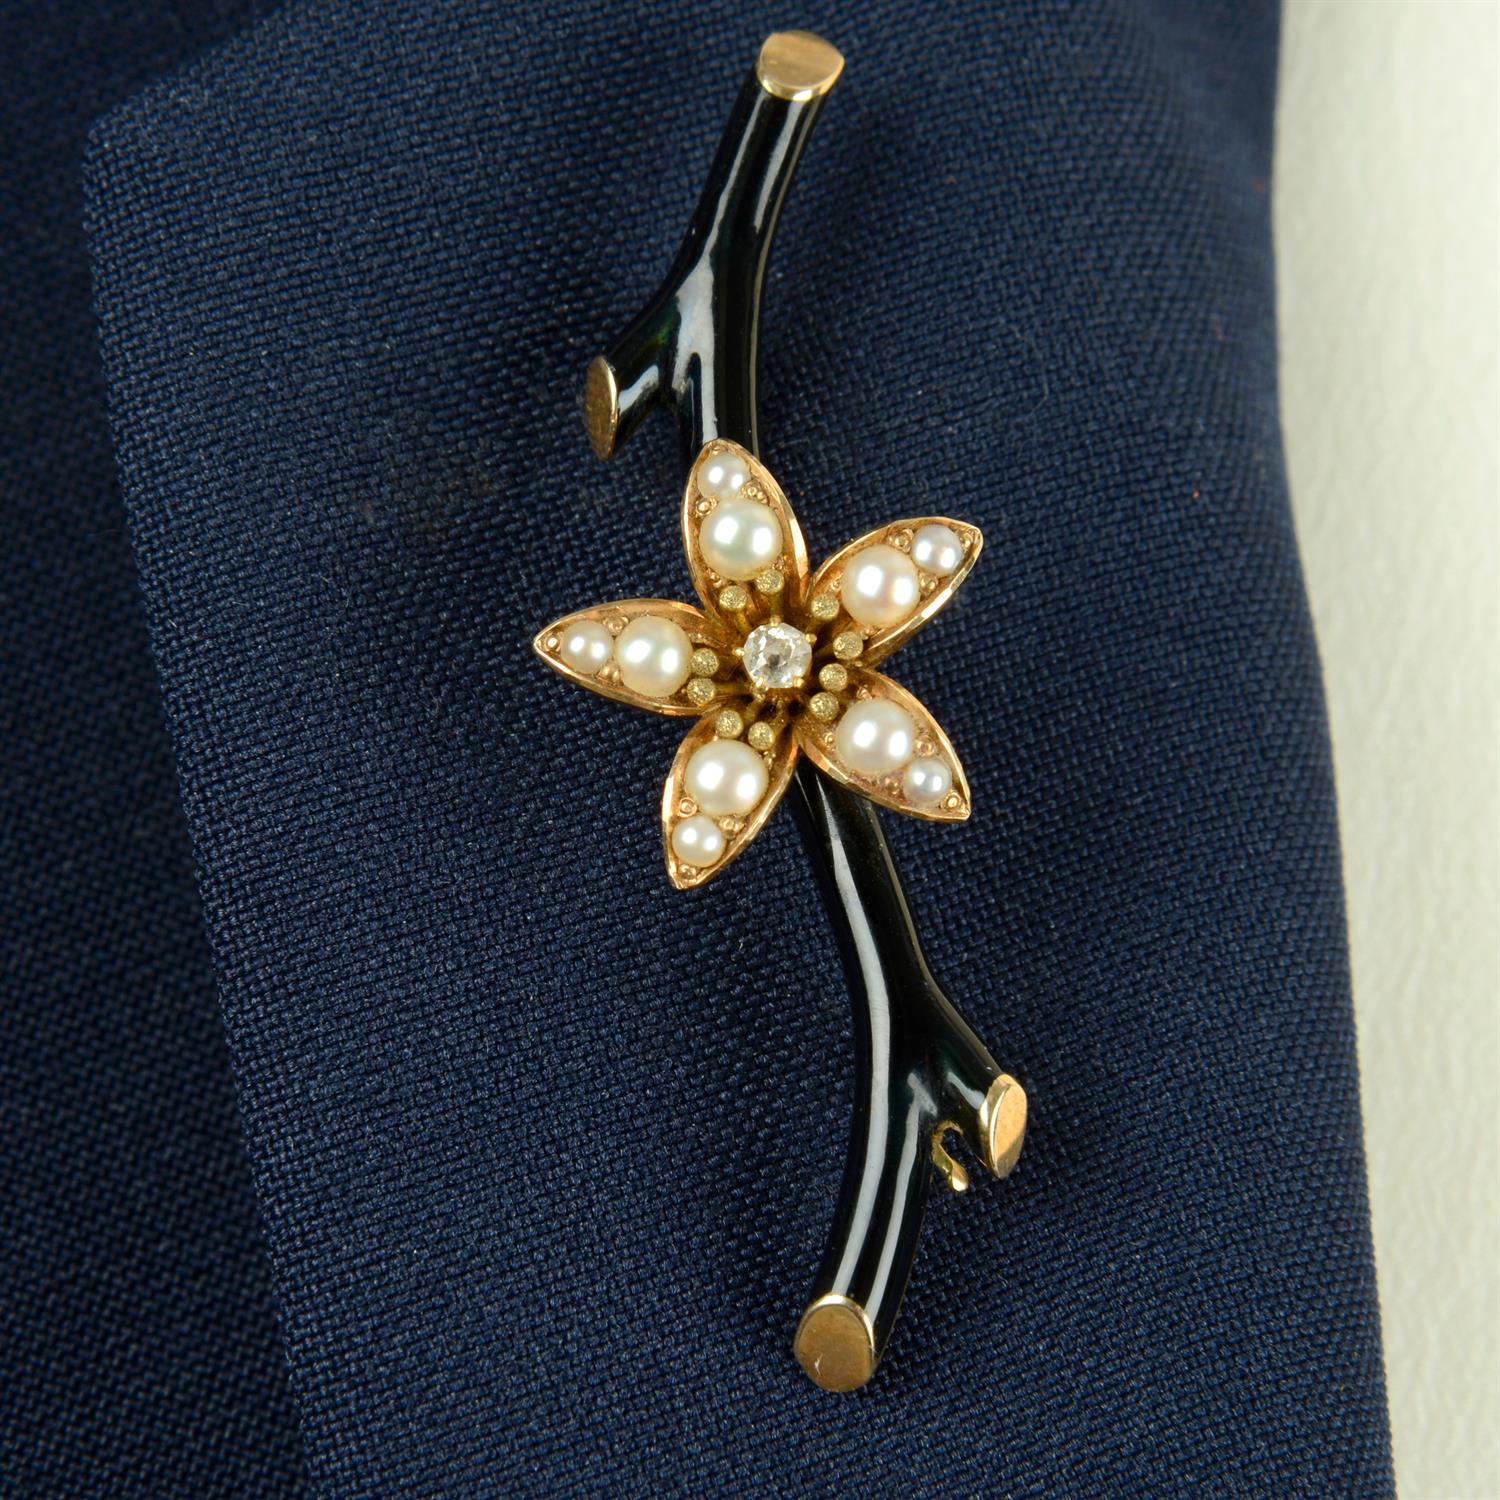 A late 19th century 14ct gold old-cut diamond and split pearl flowering black enamel branch brooch.